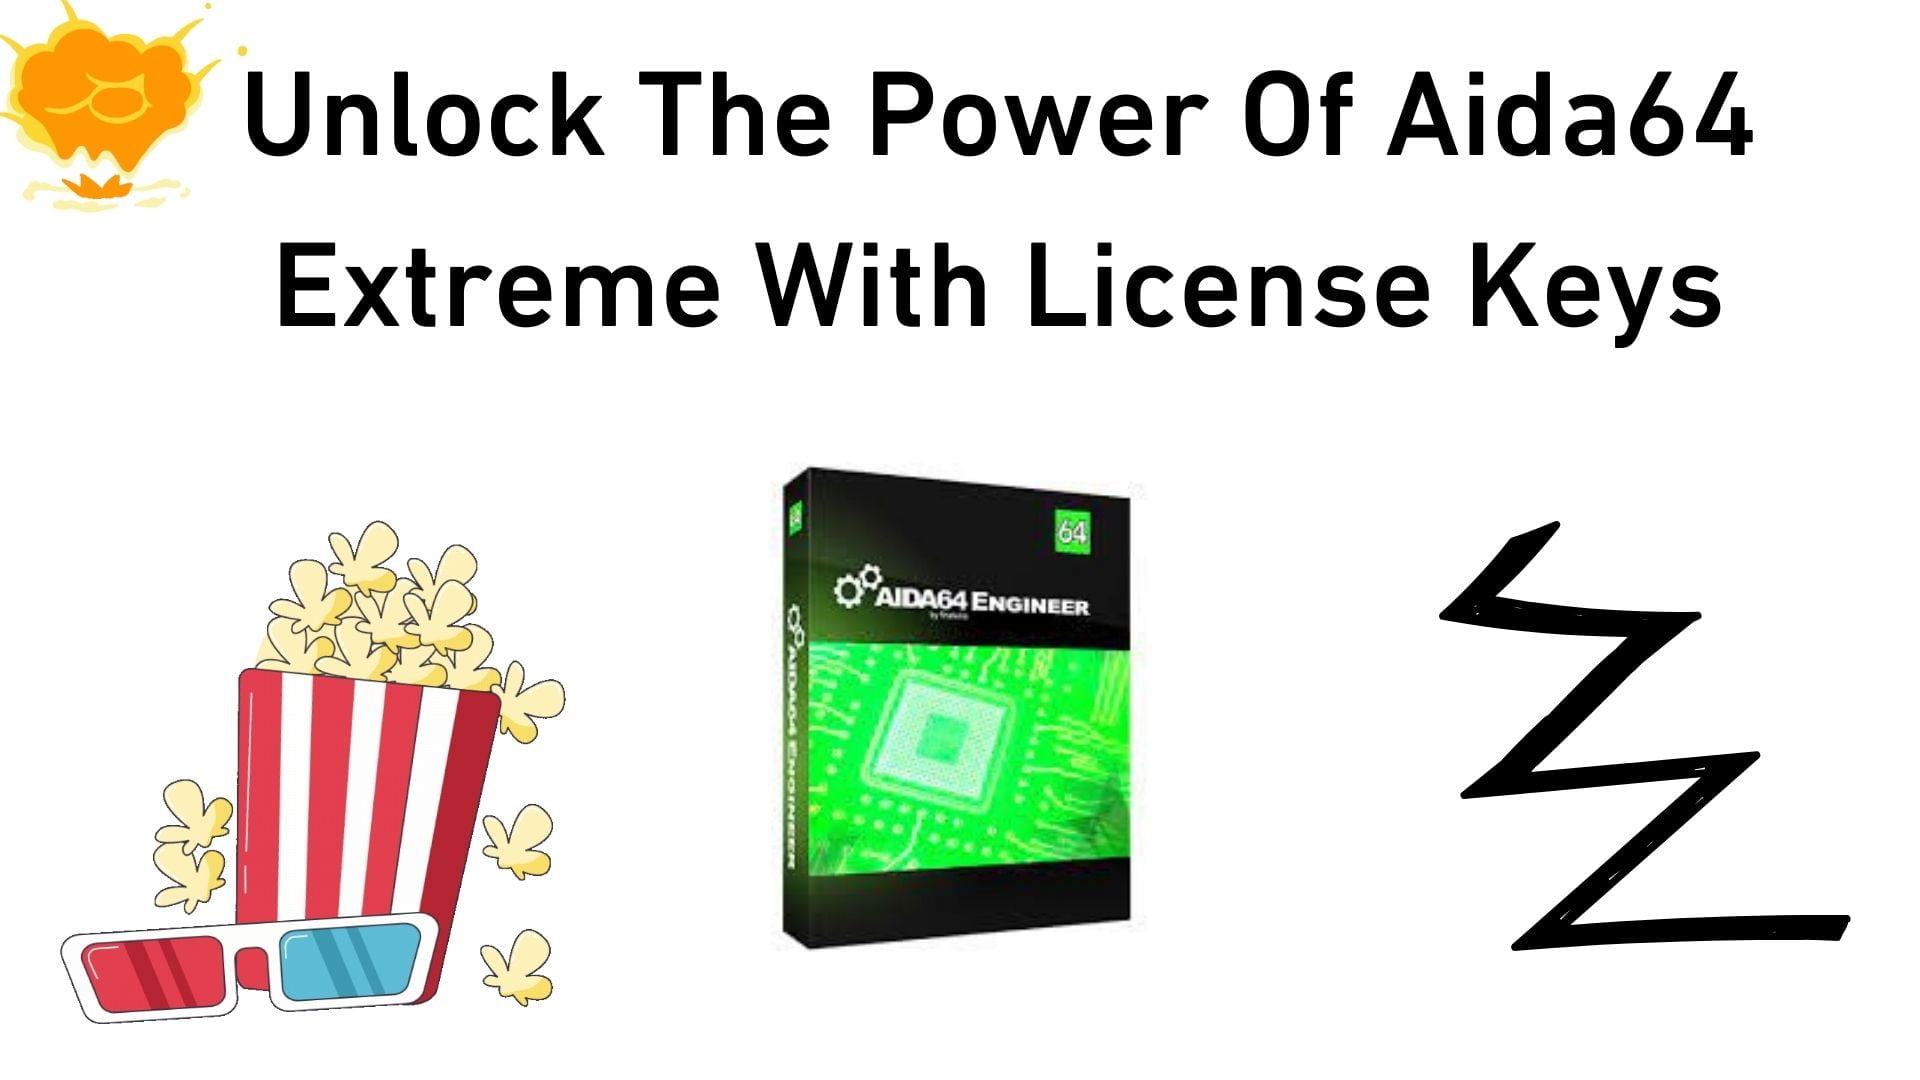 Unlock The Power Of Aida64 Extreme With License Keys